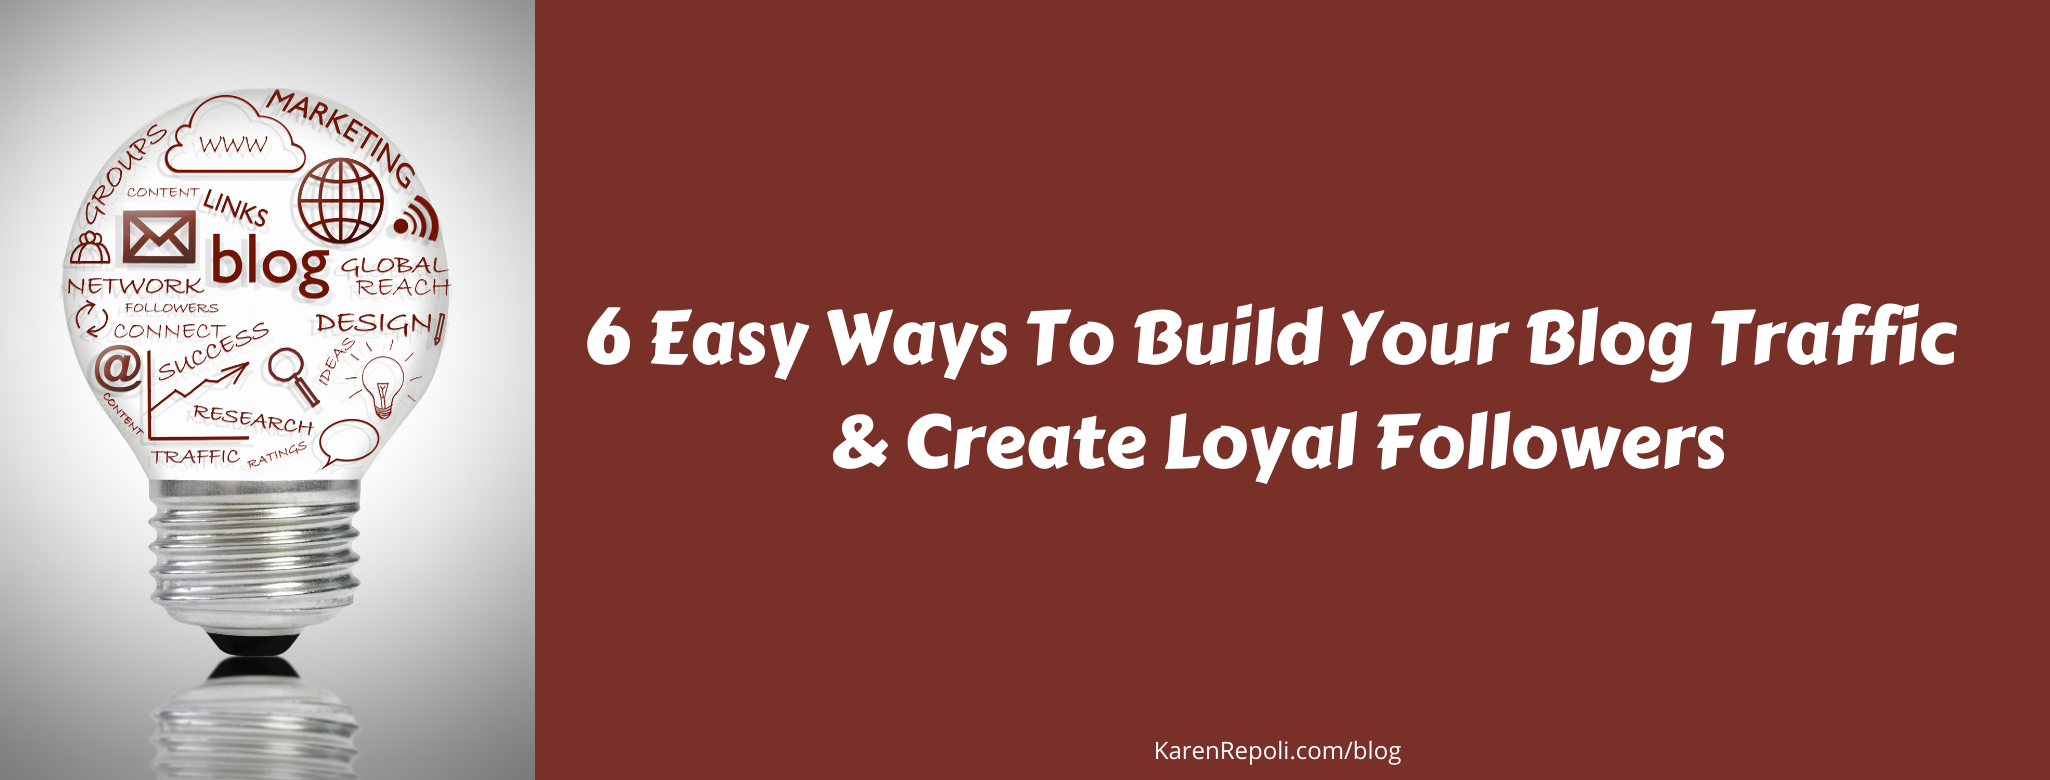 6 Easy Ways To Build Your Blog Traffic & Create Loyal Followers